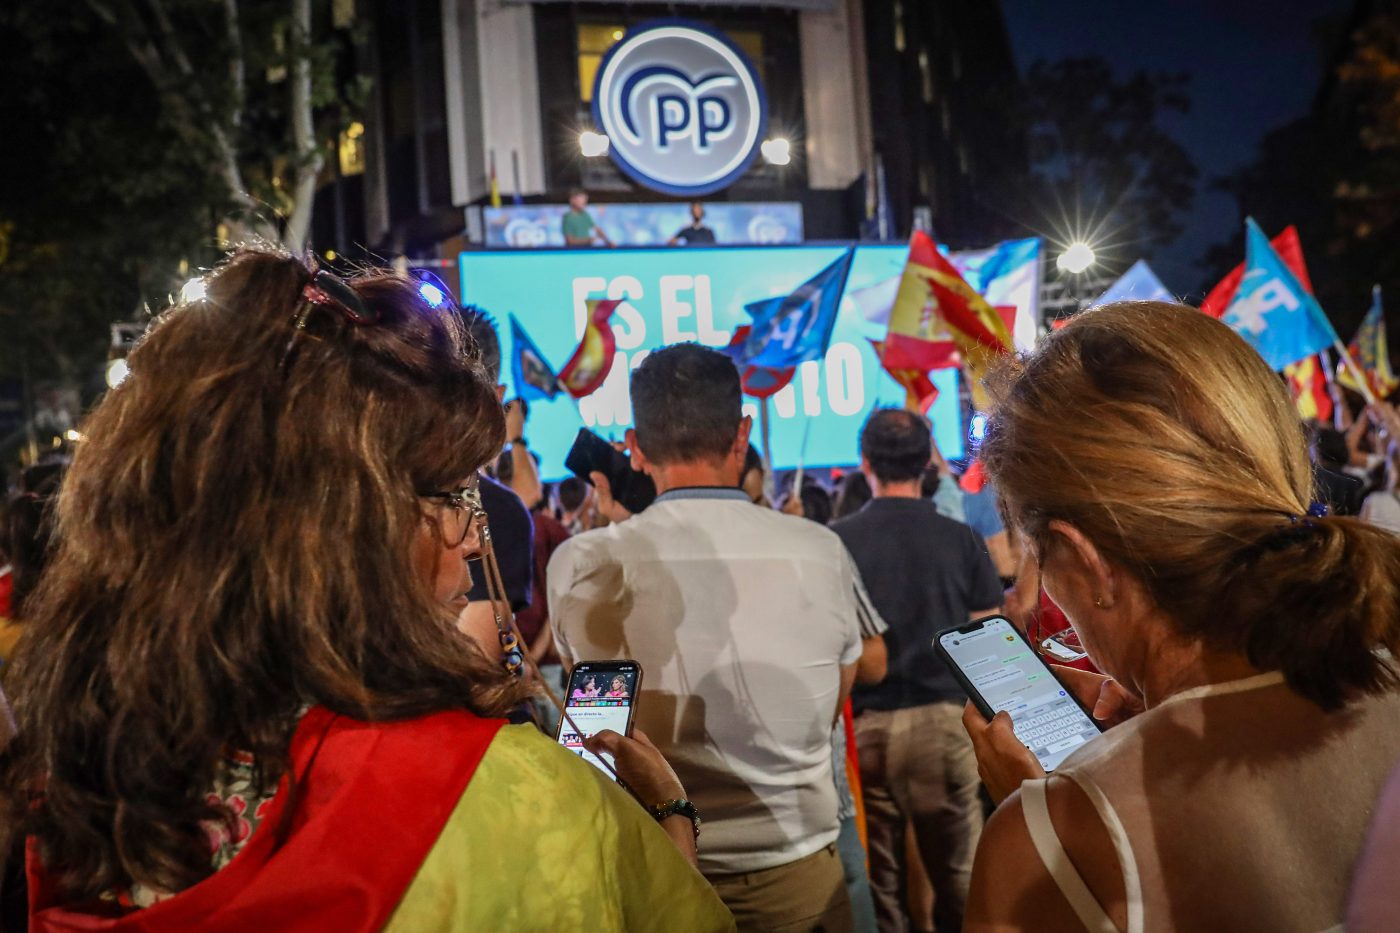 Photo: Supporters of the Popular Party consult the results of the elections on their mobile phones while they wait for the vote to be counted at the Popular Party headquarters. Dozens of people gather at Calle Génova 13 at the gates of the headquarters of the Popular Party (PP) to await the results of the Spanish general elections, which the right-wing Spanish party won with 136 seats in Congress over 122 for the Spanish Socialist Workers Party (PSOE). Credit: David Canales / SOPA Images/Sipa USA